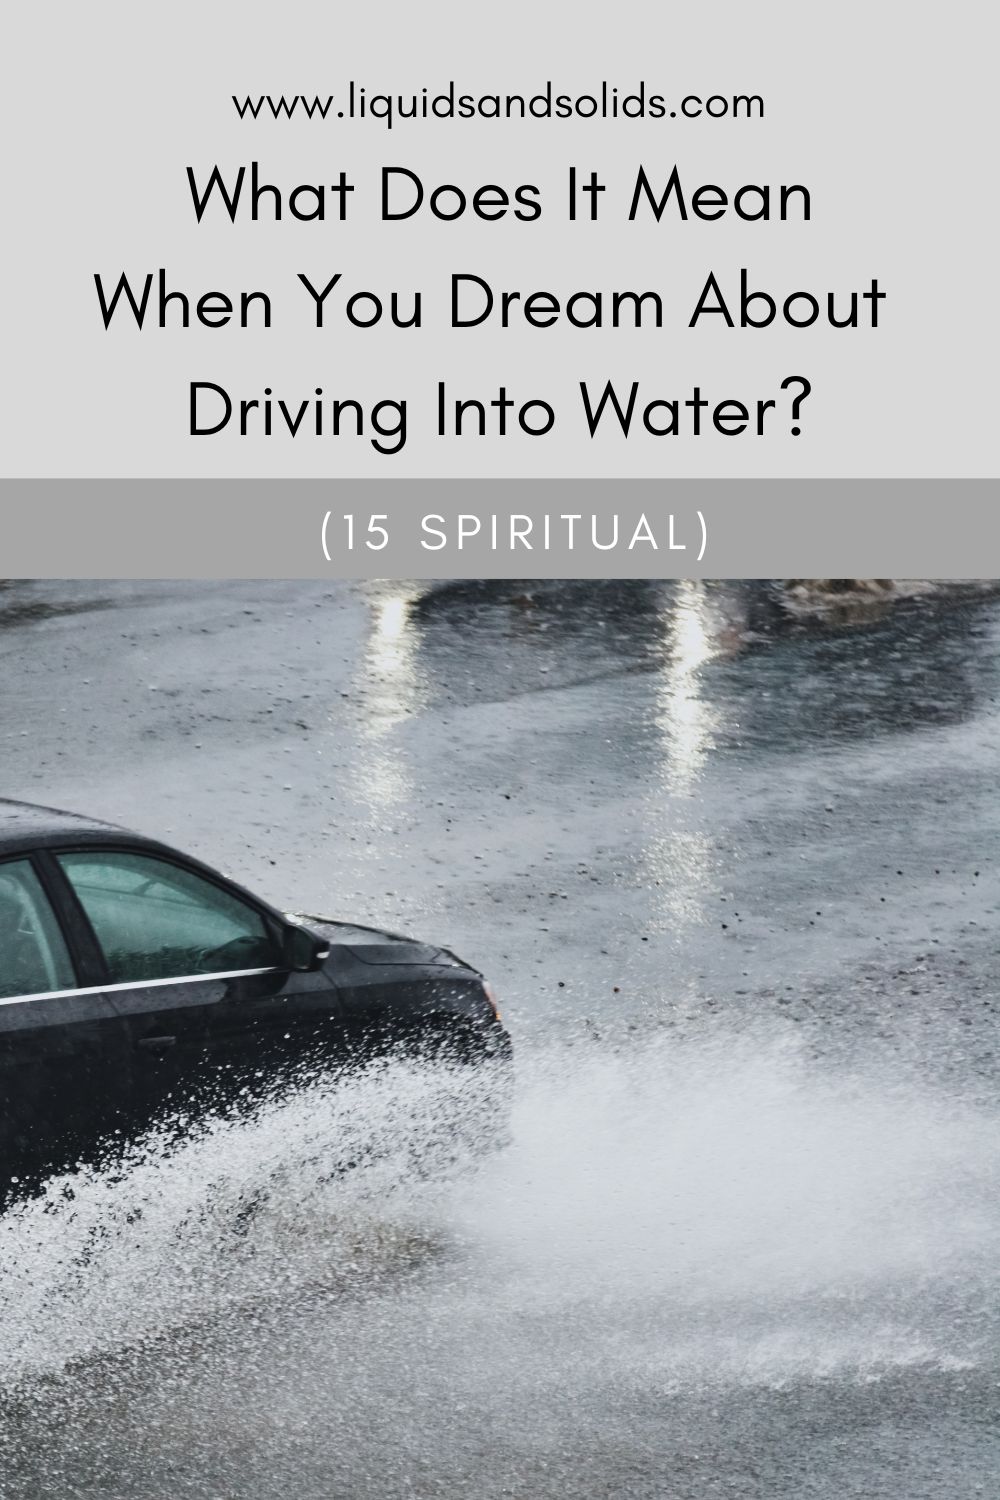 The Meaning Of Dreams About Crashing A Car Into A Wall